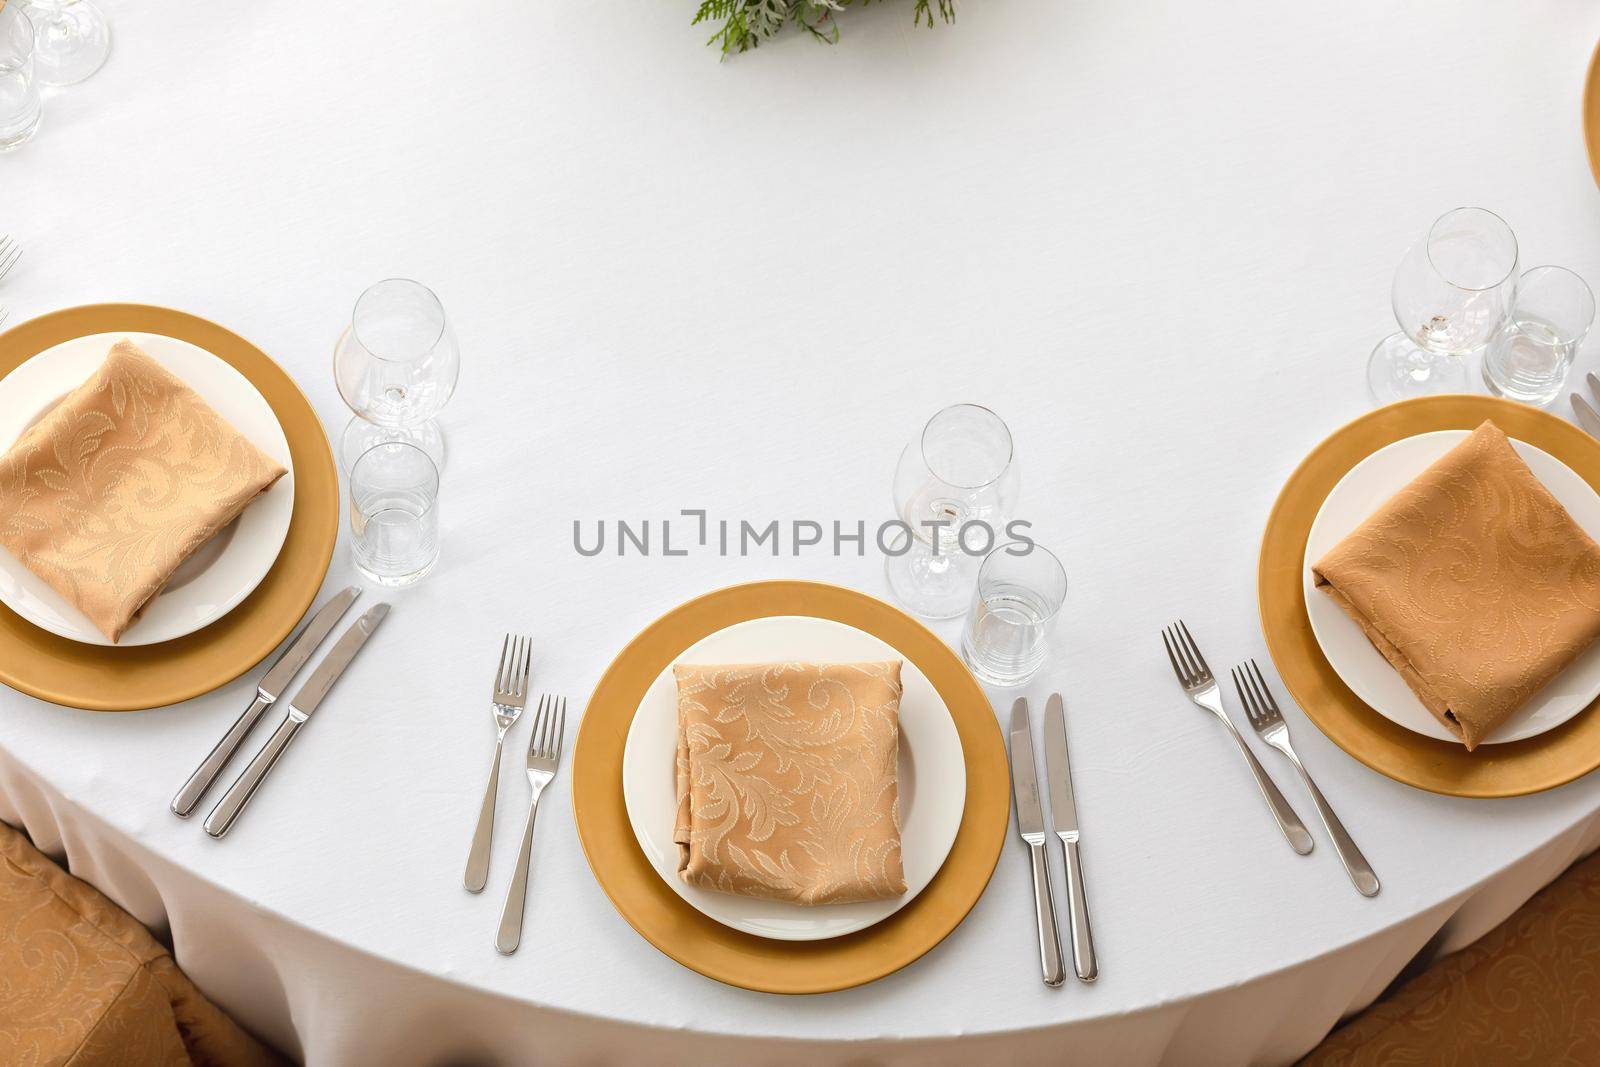 Top view of elegant plates with folded napkins and glassware served on clean white cloth in restaurant